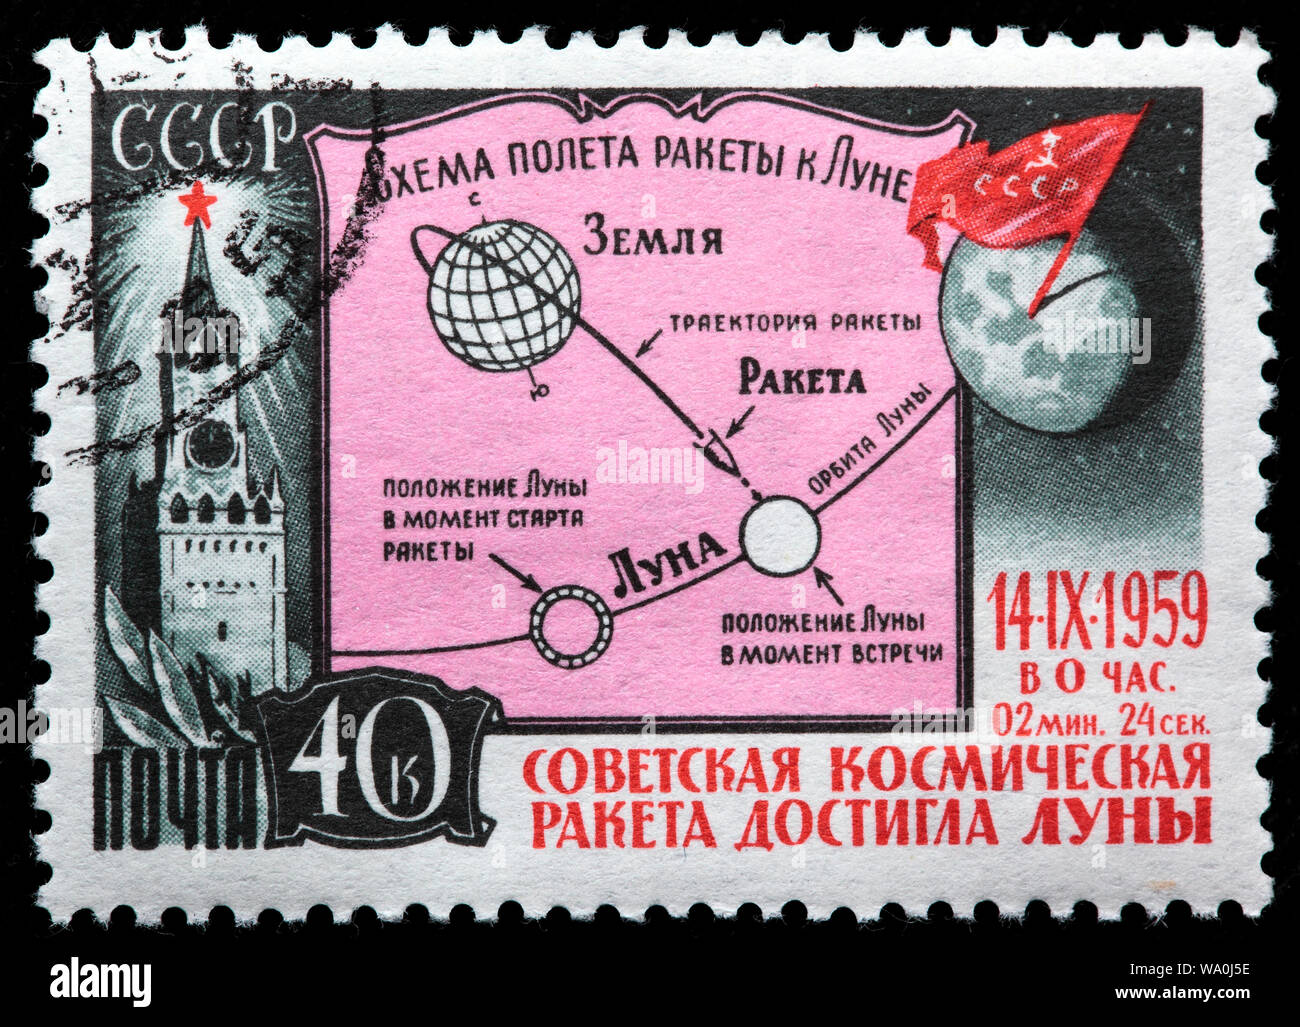 Launch of the second space moon rocket, postage stamp, Russia, USSR, 1959 Stock Photo